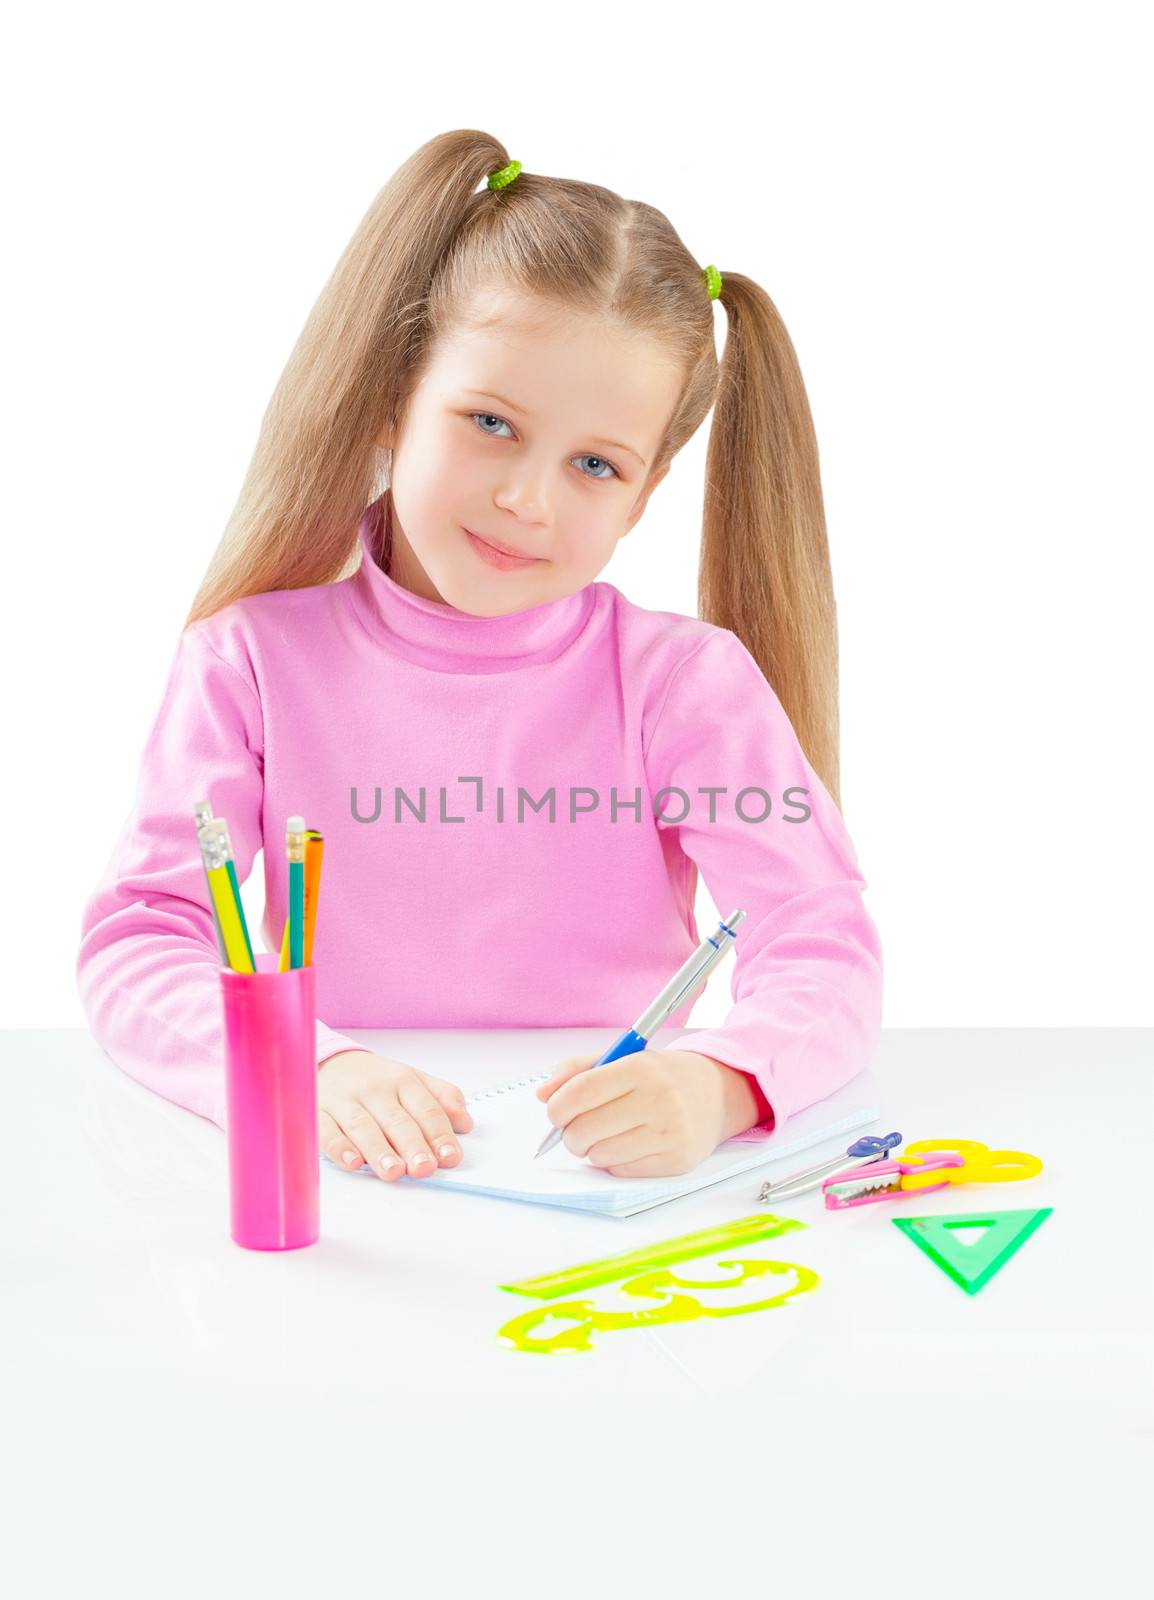 litli girl sitting at table and writing with ballpoint pen isolated